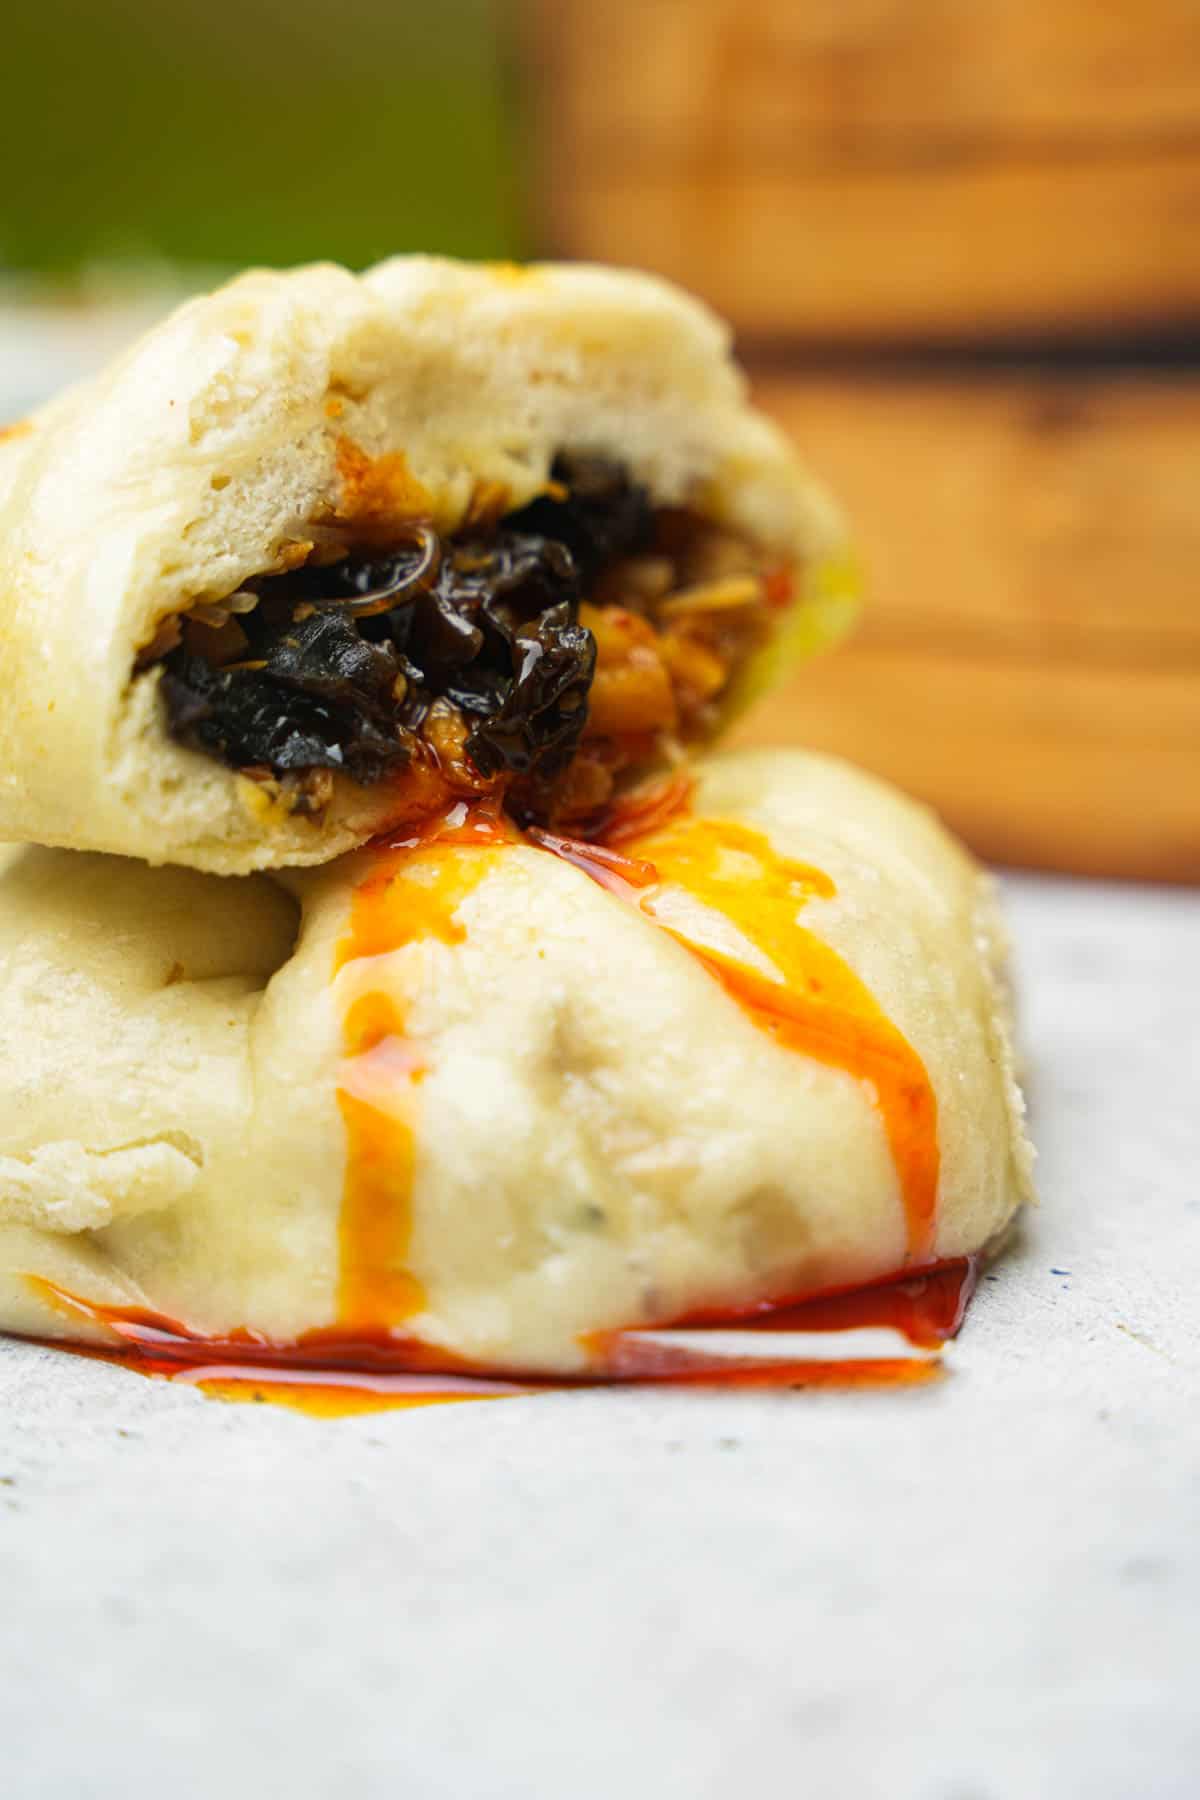 Banh bao cut into dripping with chili oil.